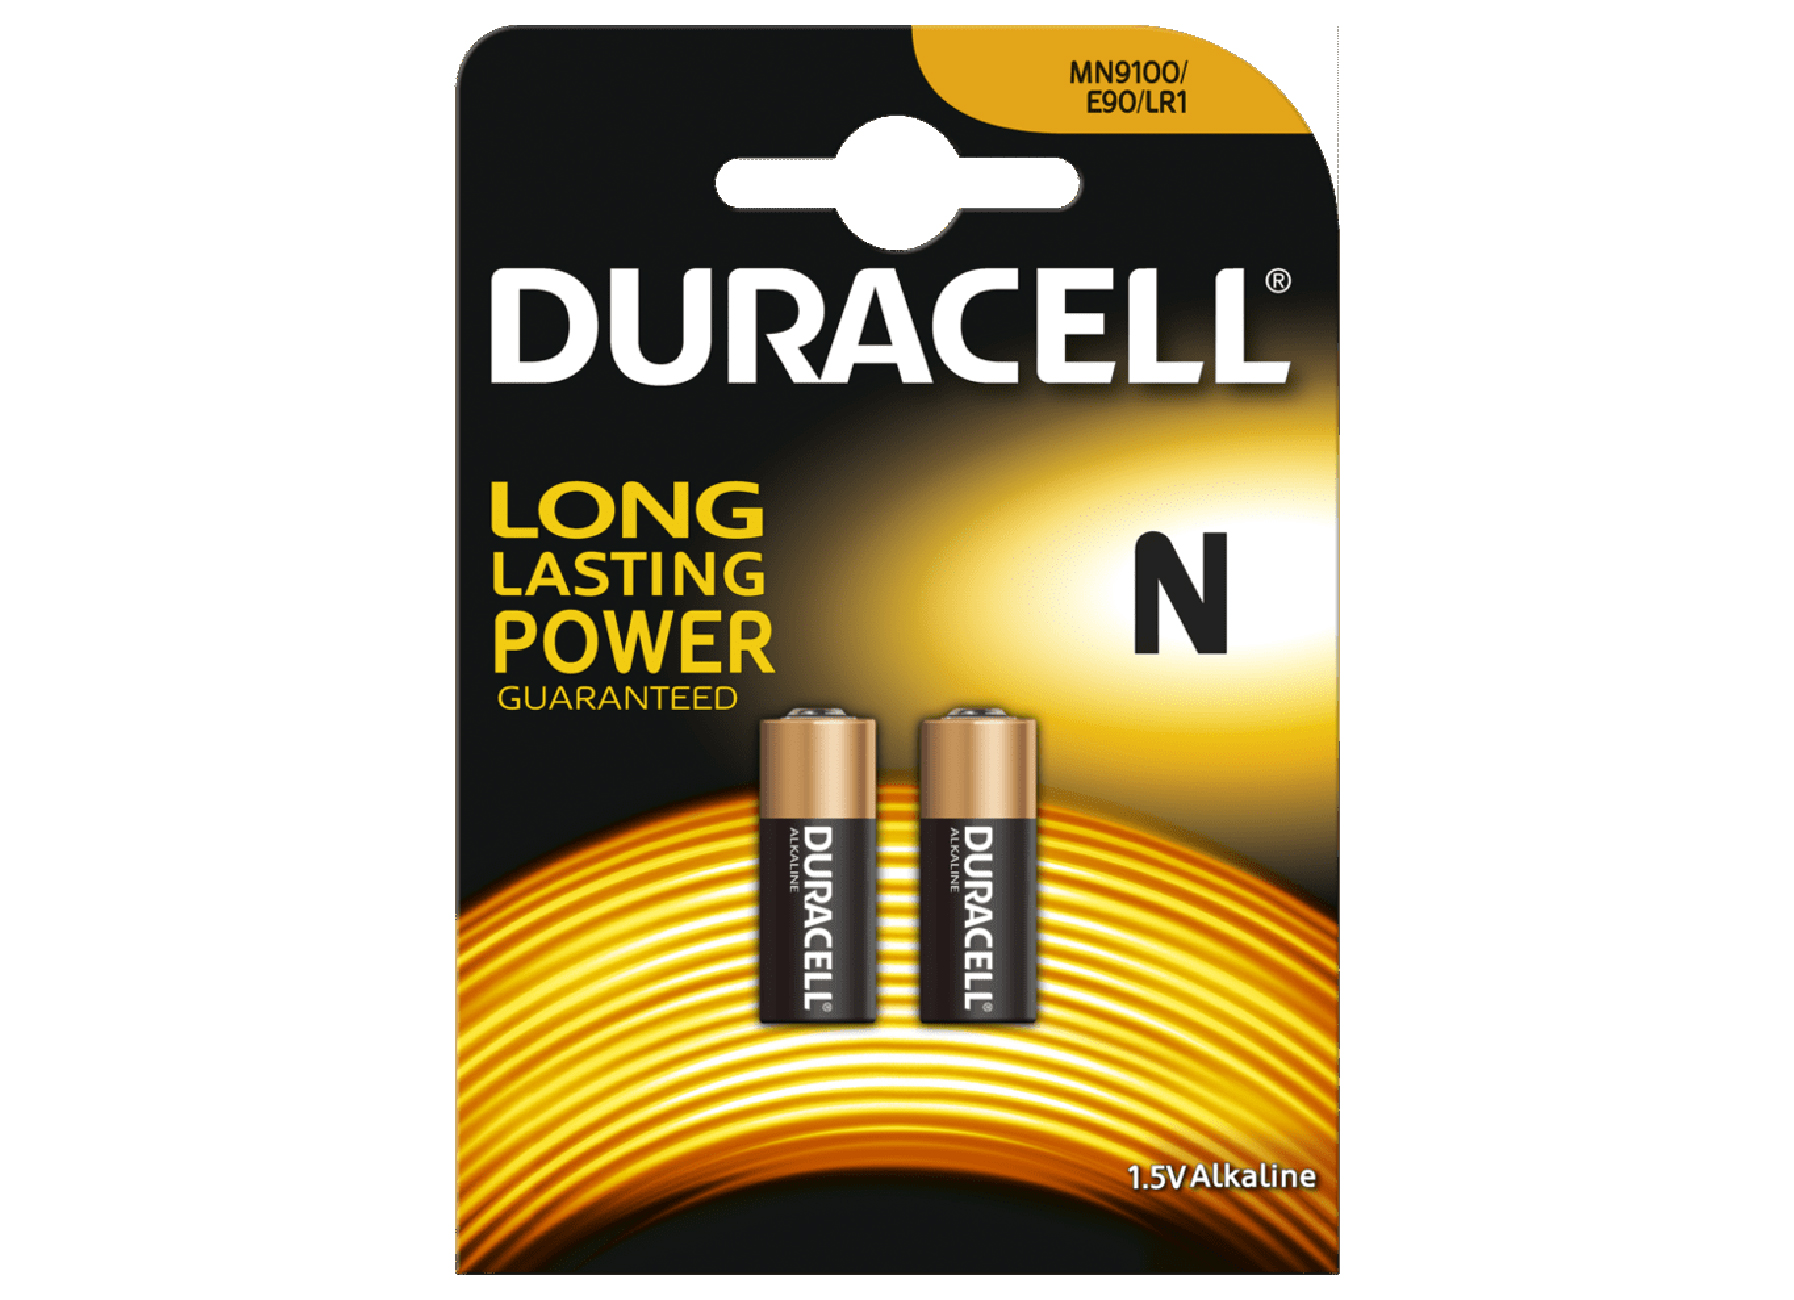 DURACELL SPECIALTY ALKALINE N 2-PACK MN9100